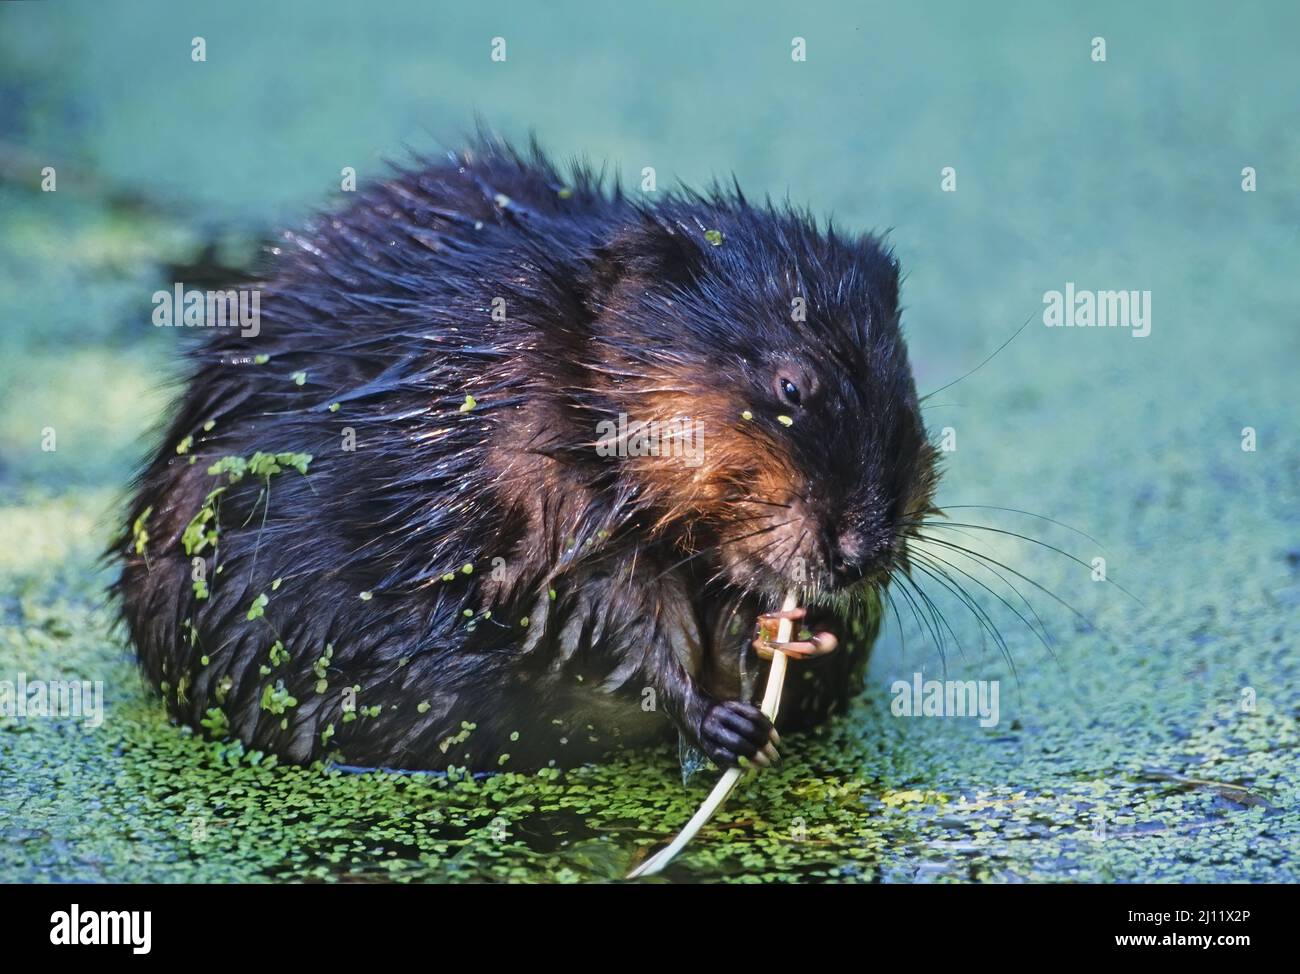 Muskrat feeding up close on duckweed covered pond Stock Photo